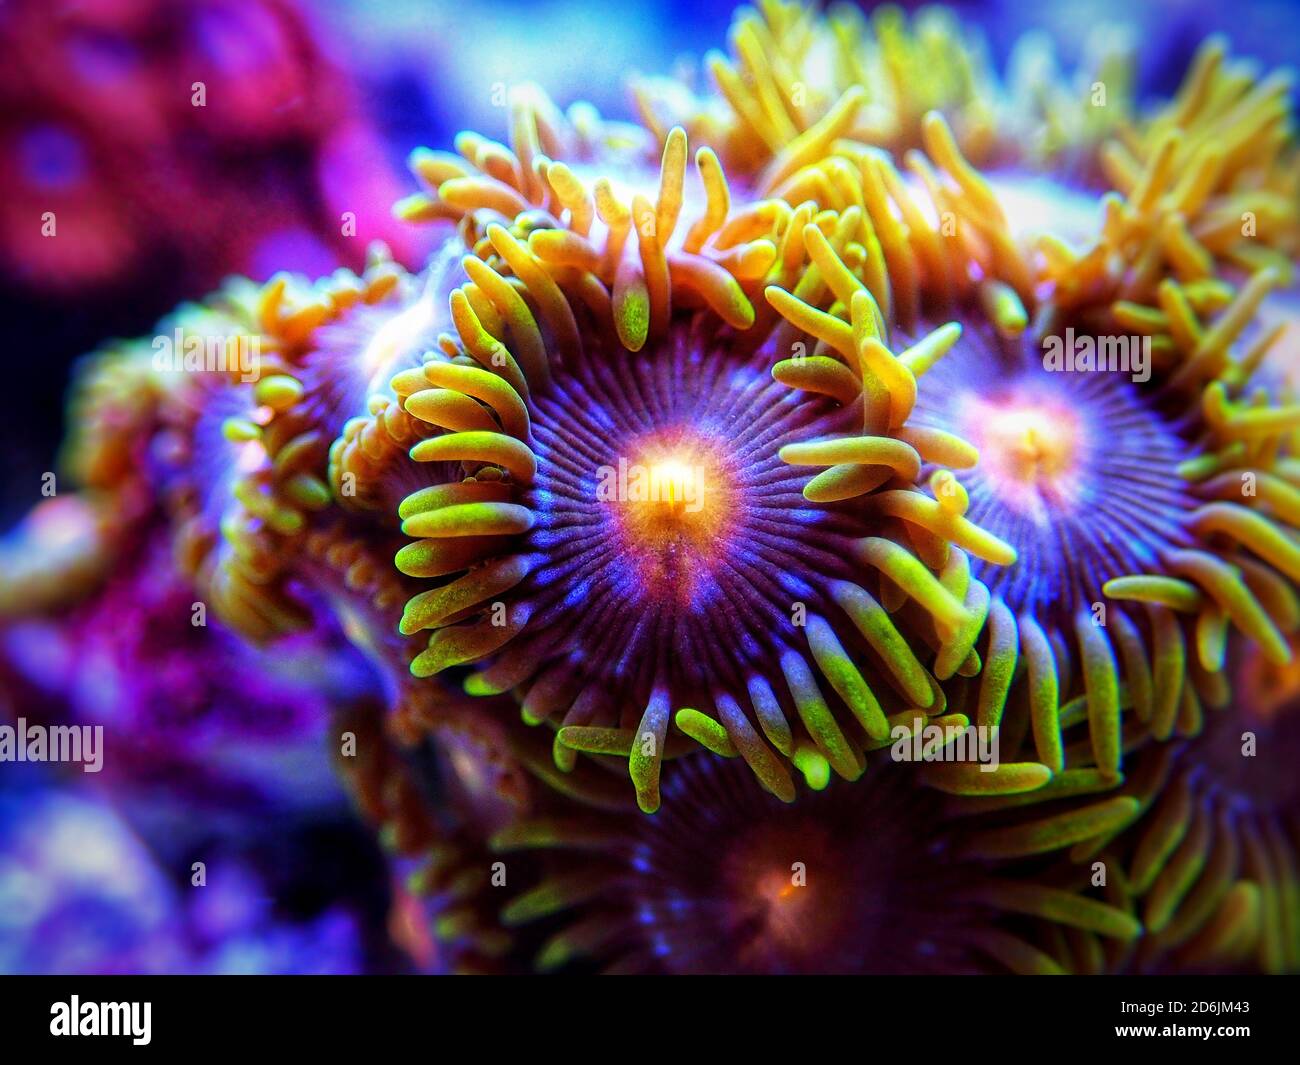 Colorful colony of Zoanthus polyps soft coral Stock Photo